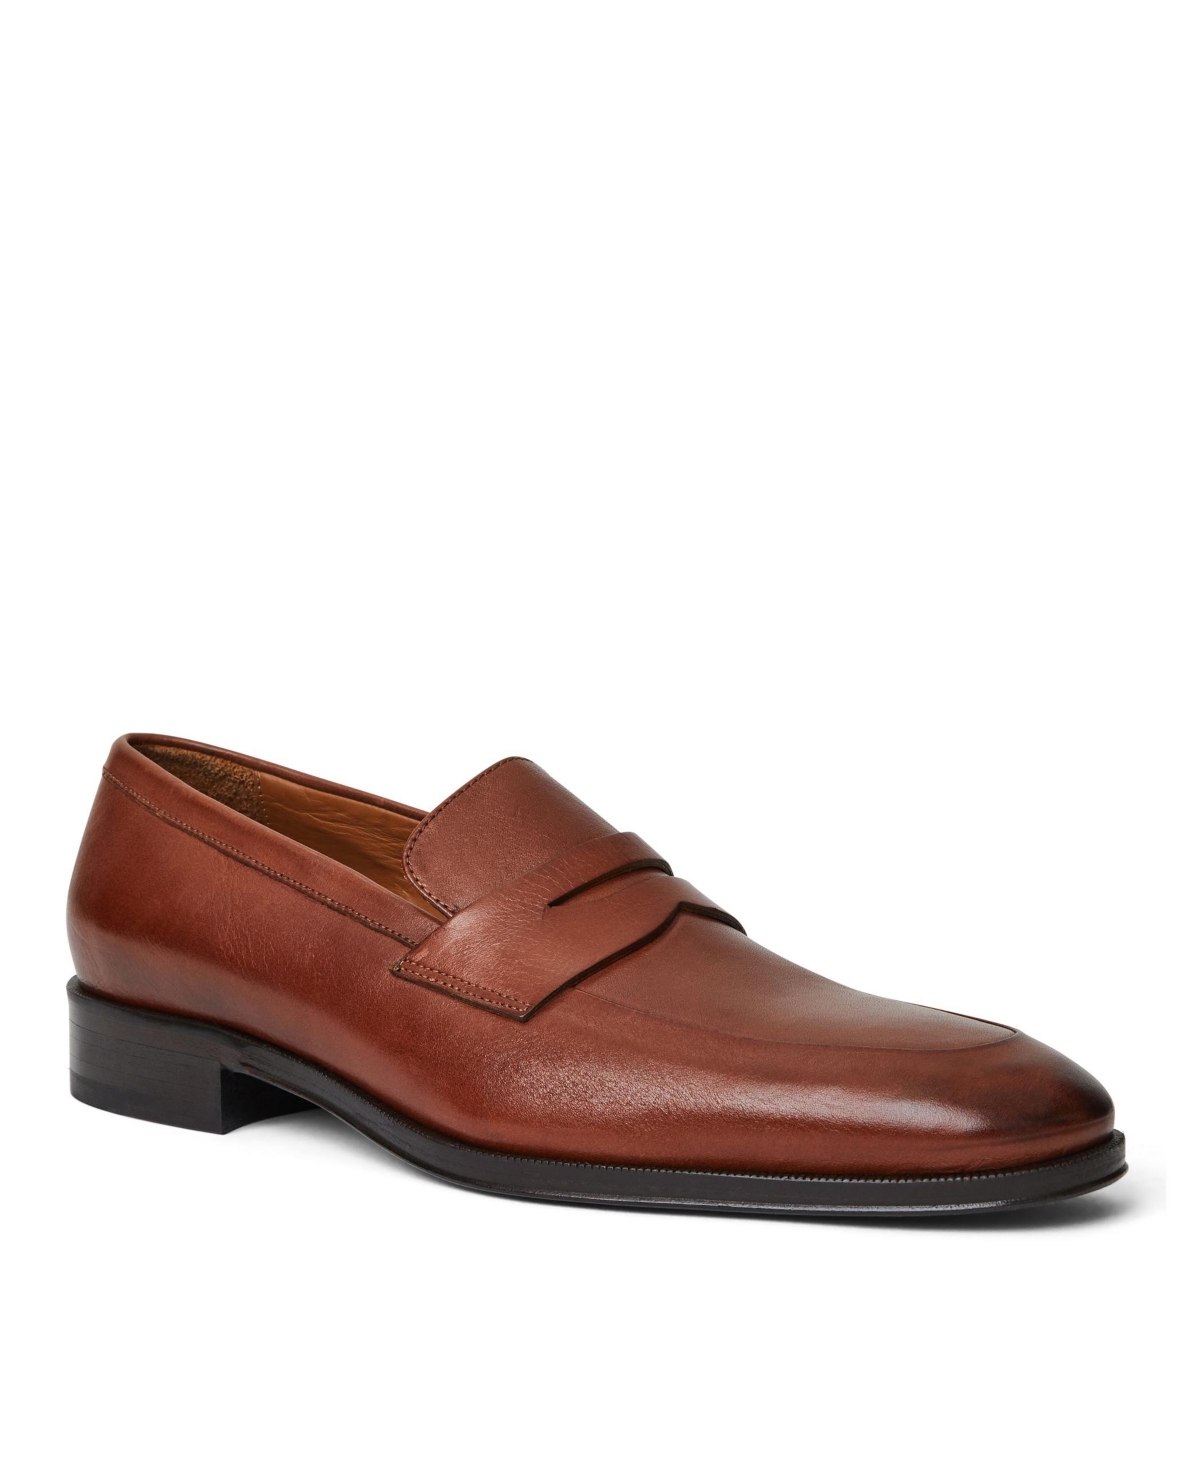 Men's Maioco Penny Leather Loafer - Cognac